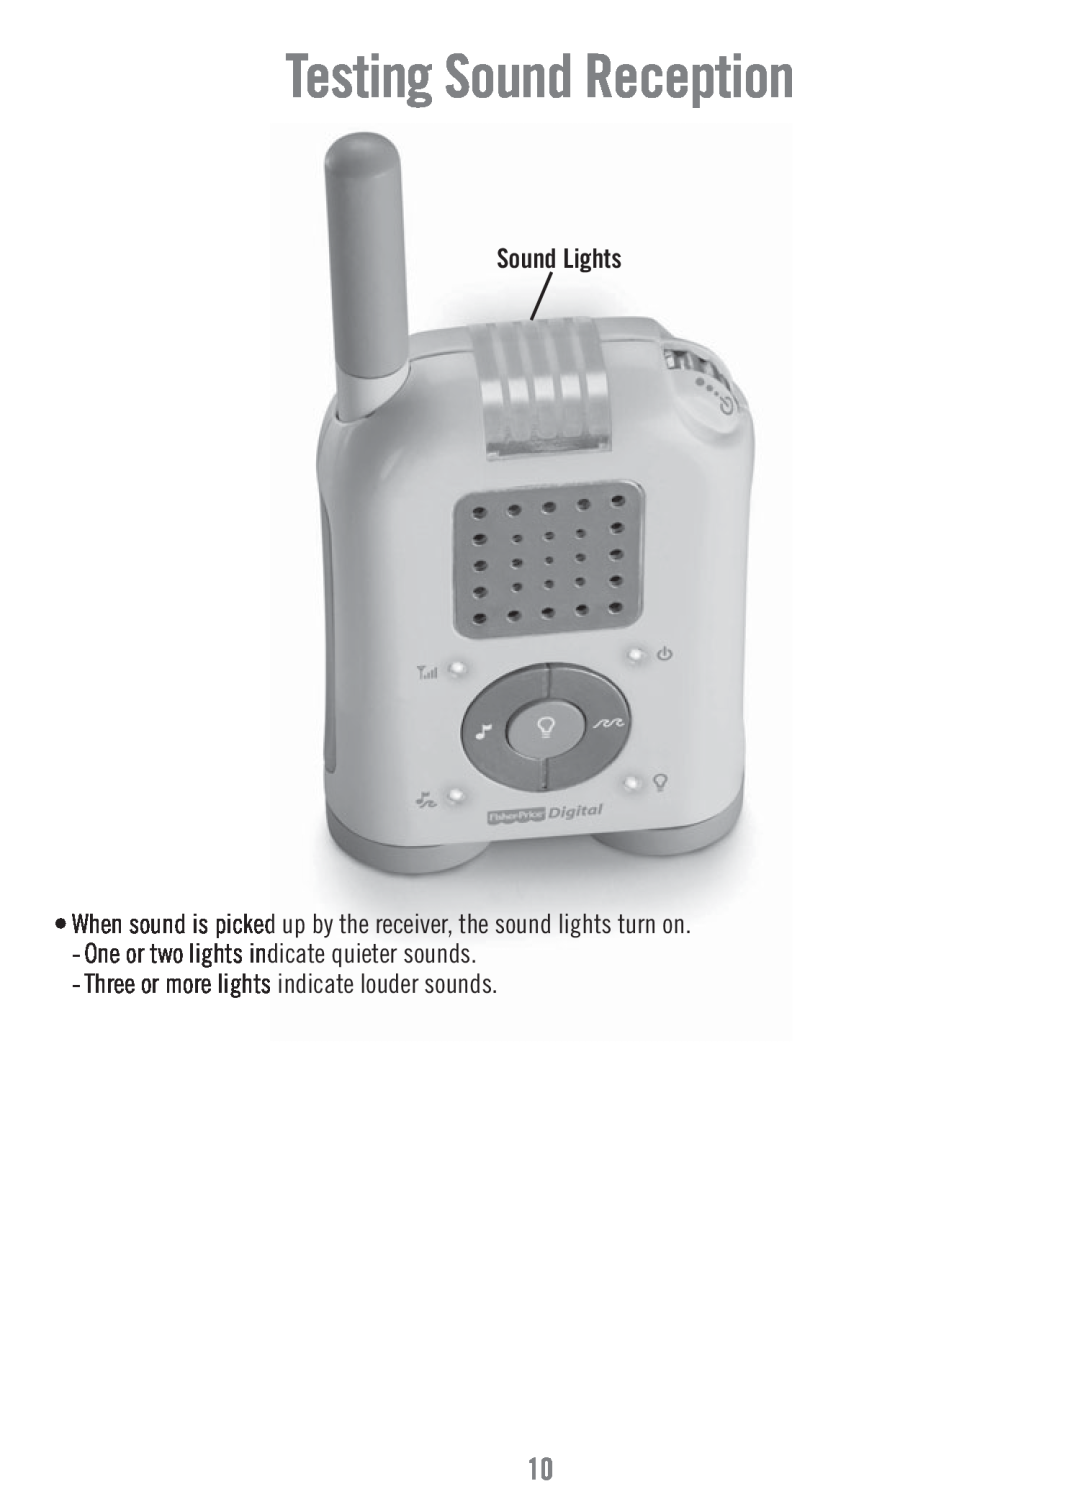 Fisher-Price P6584 manual Testing Sound Reception, Sound Lights, One or two lights indicate quieter sounds 